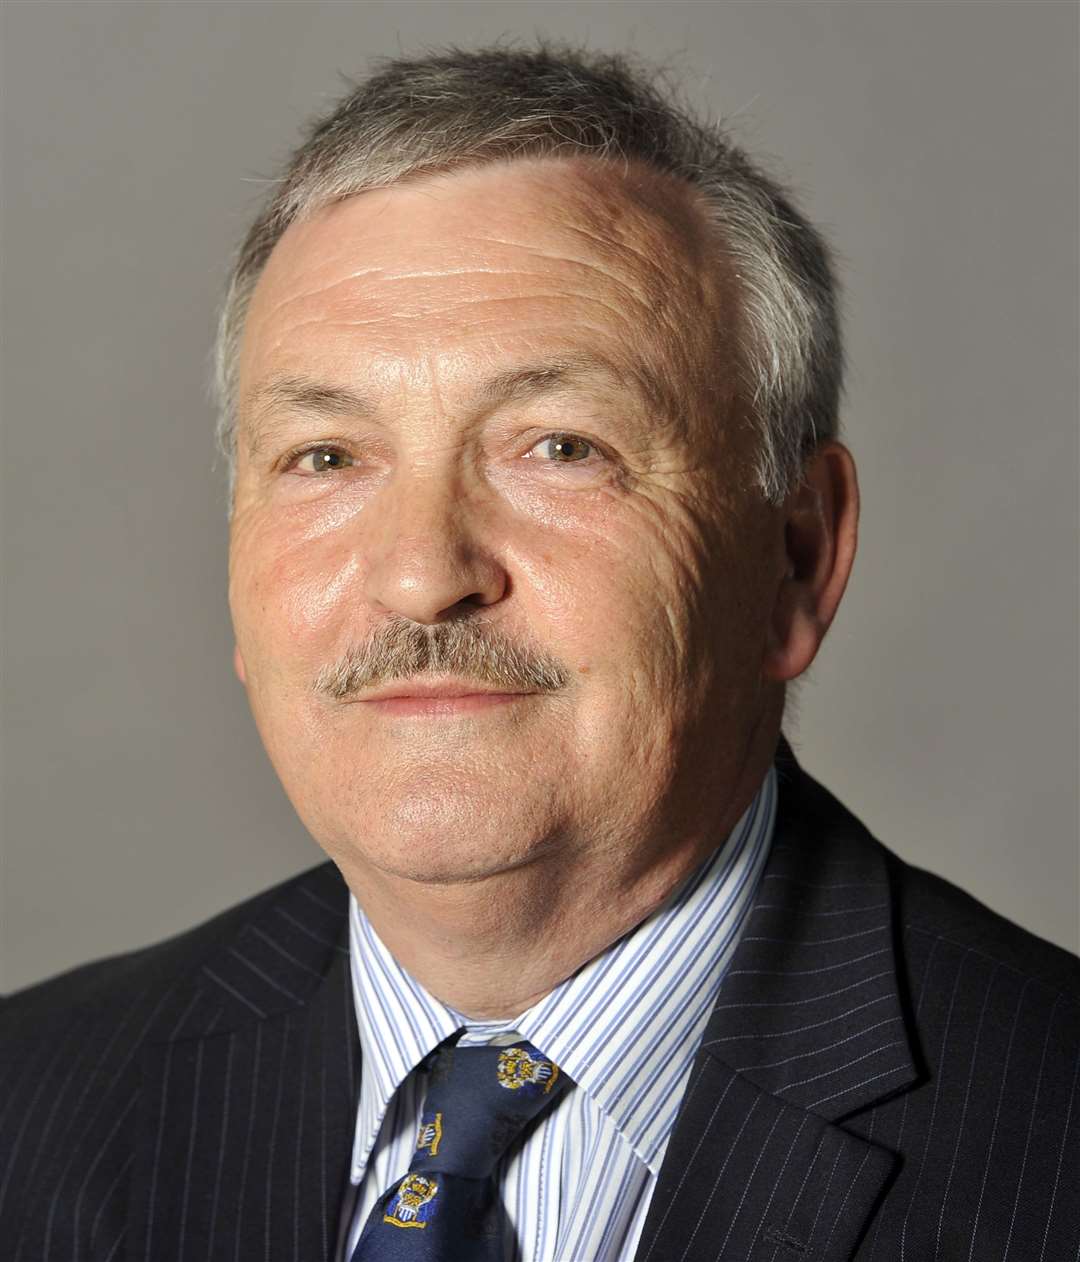 Medway Council leader Alan Jarrett has faced a rebellion from within his party, forced to pull a key vote, sacked a close ally, been told to resign and learnt the City of Culture bid for Medway had failed this week